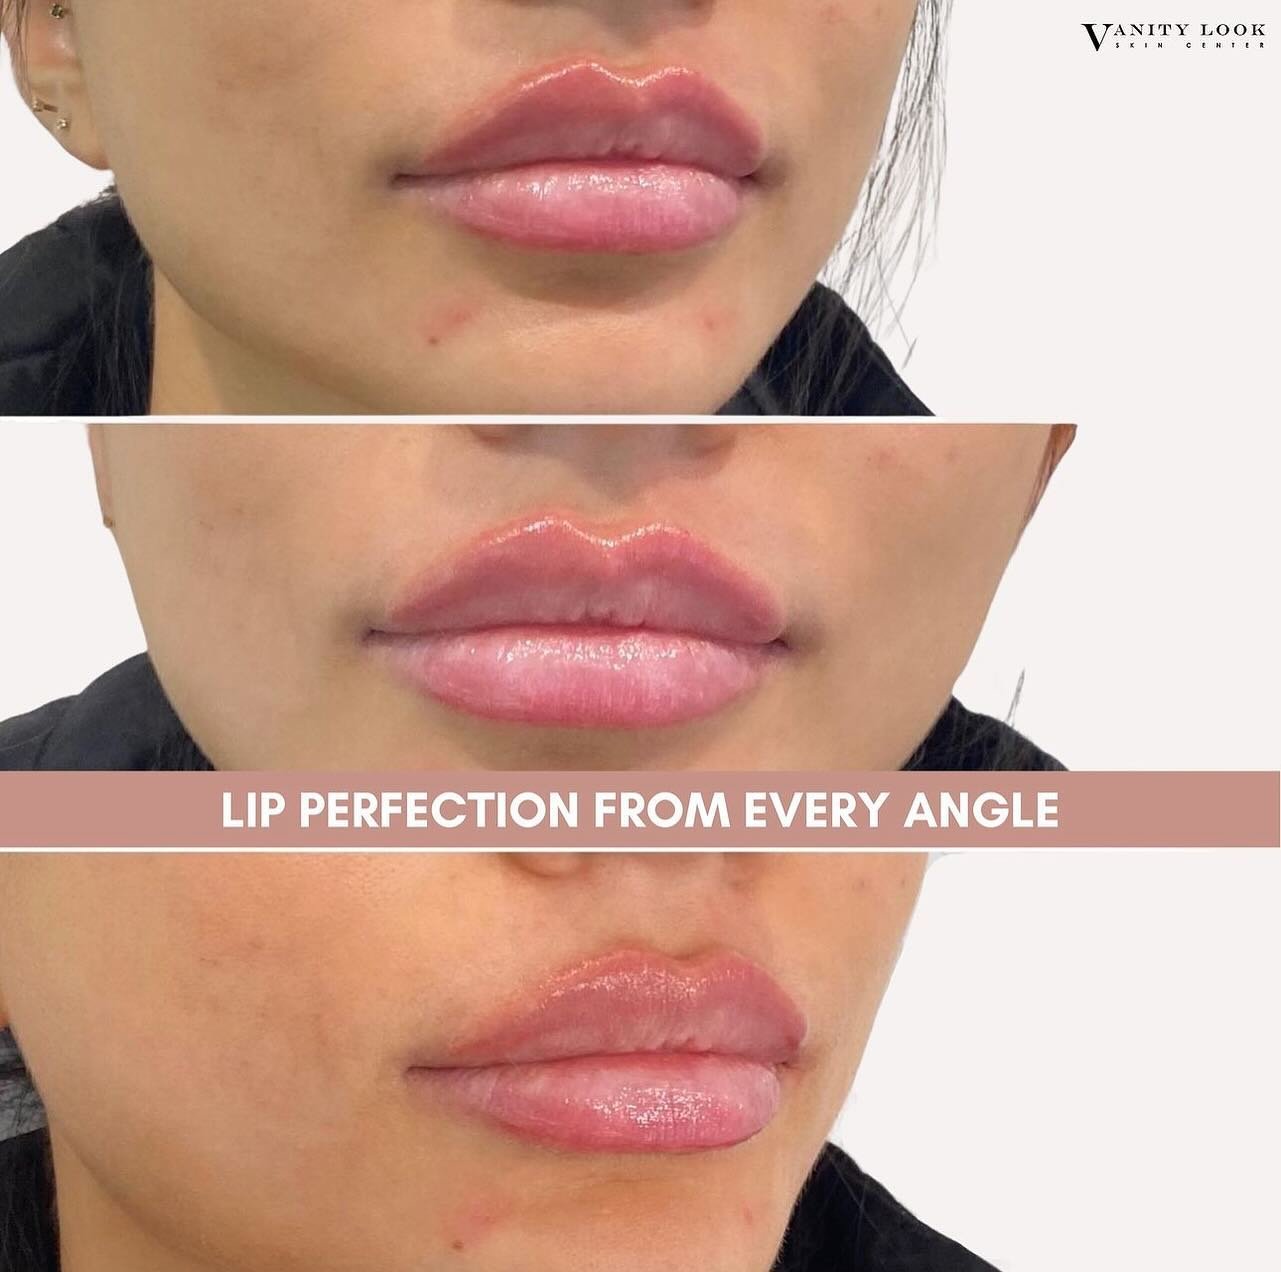 Perfection from every angle! 💉👄 Swipe to see how you can get $75 off any Juvederm filler!

📍 Vanity Look Skin Center: 

Where beauty meets expertise. Call us at (818) 290-3938 to schedule your transformation!

#lipfiller #fillers #filler #reels #r